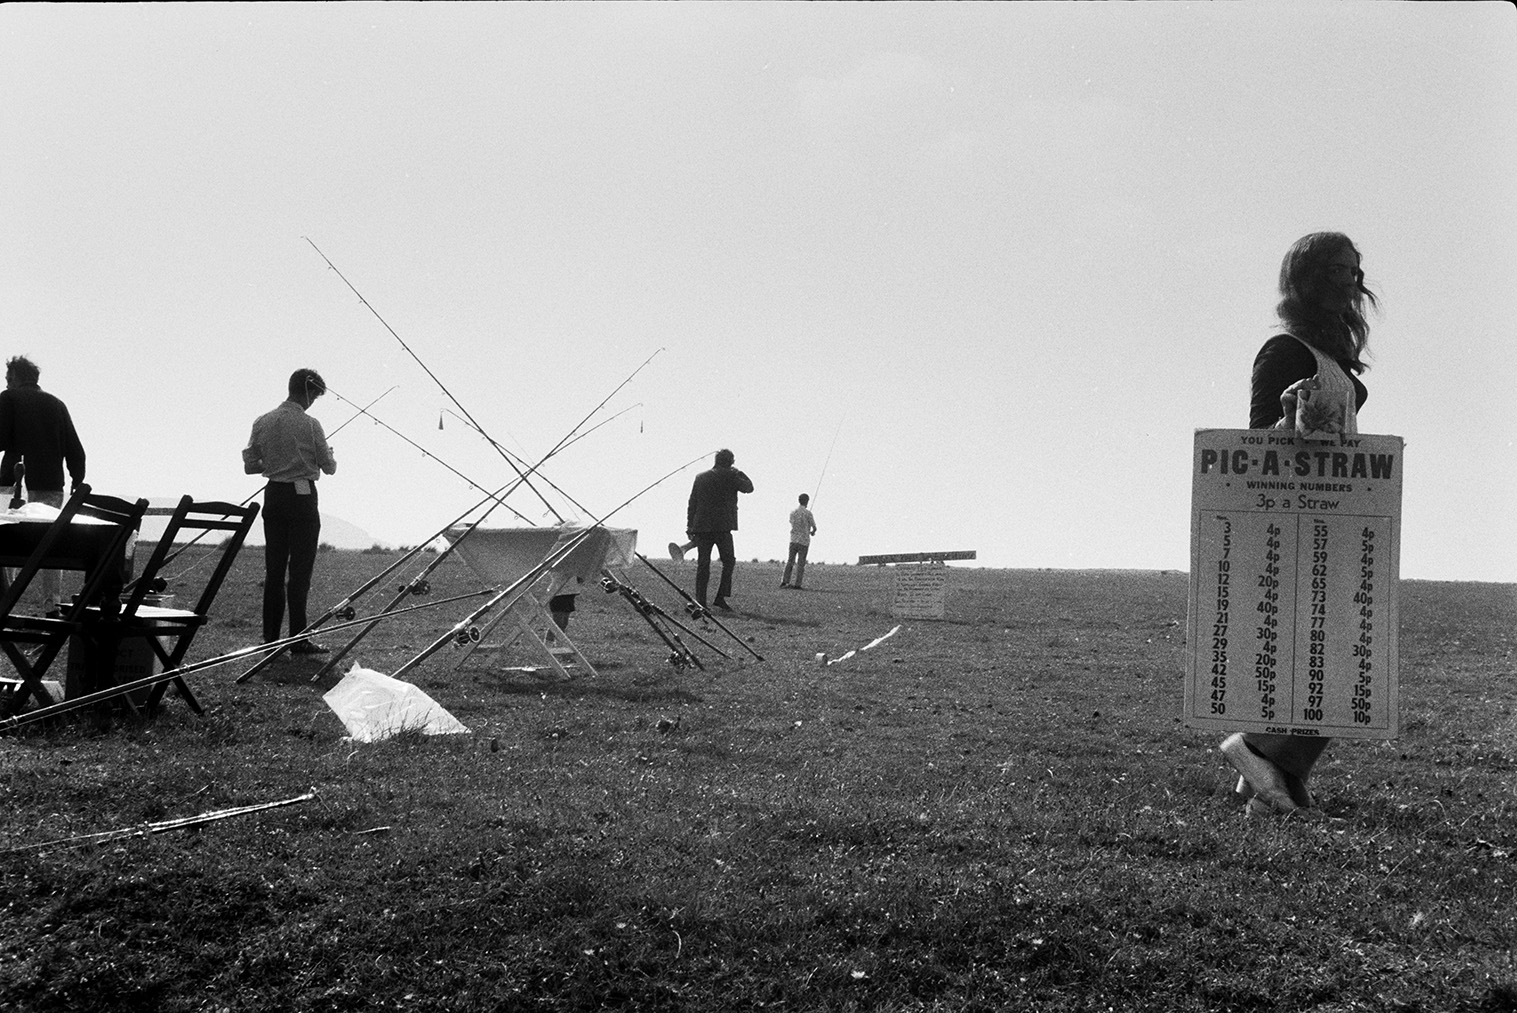 Appledore Angling Contest at Westward Ho! Fishing rods are stacked against a table with competitors stood around. A woman in the foreground is advertising a straw game.